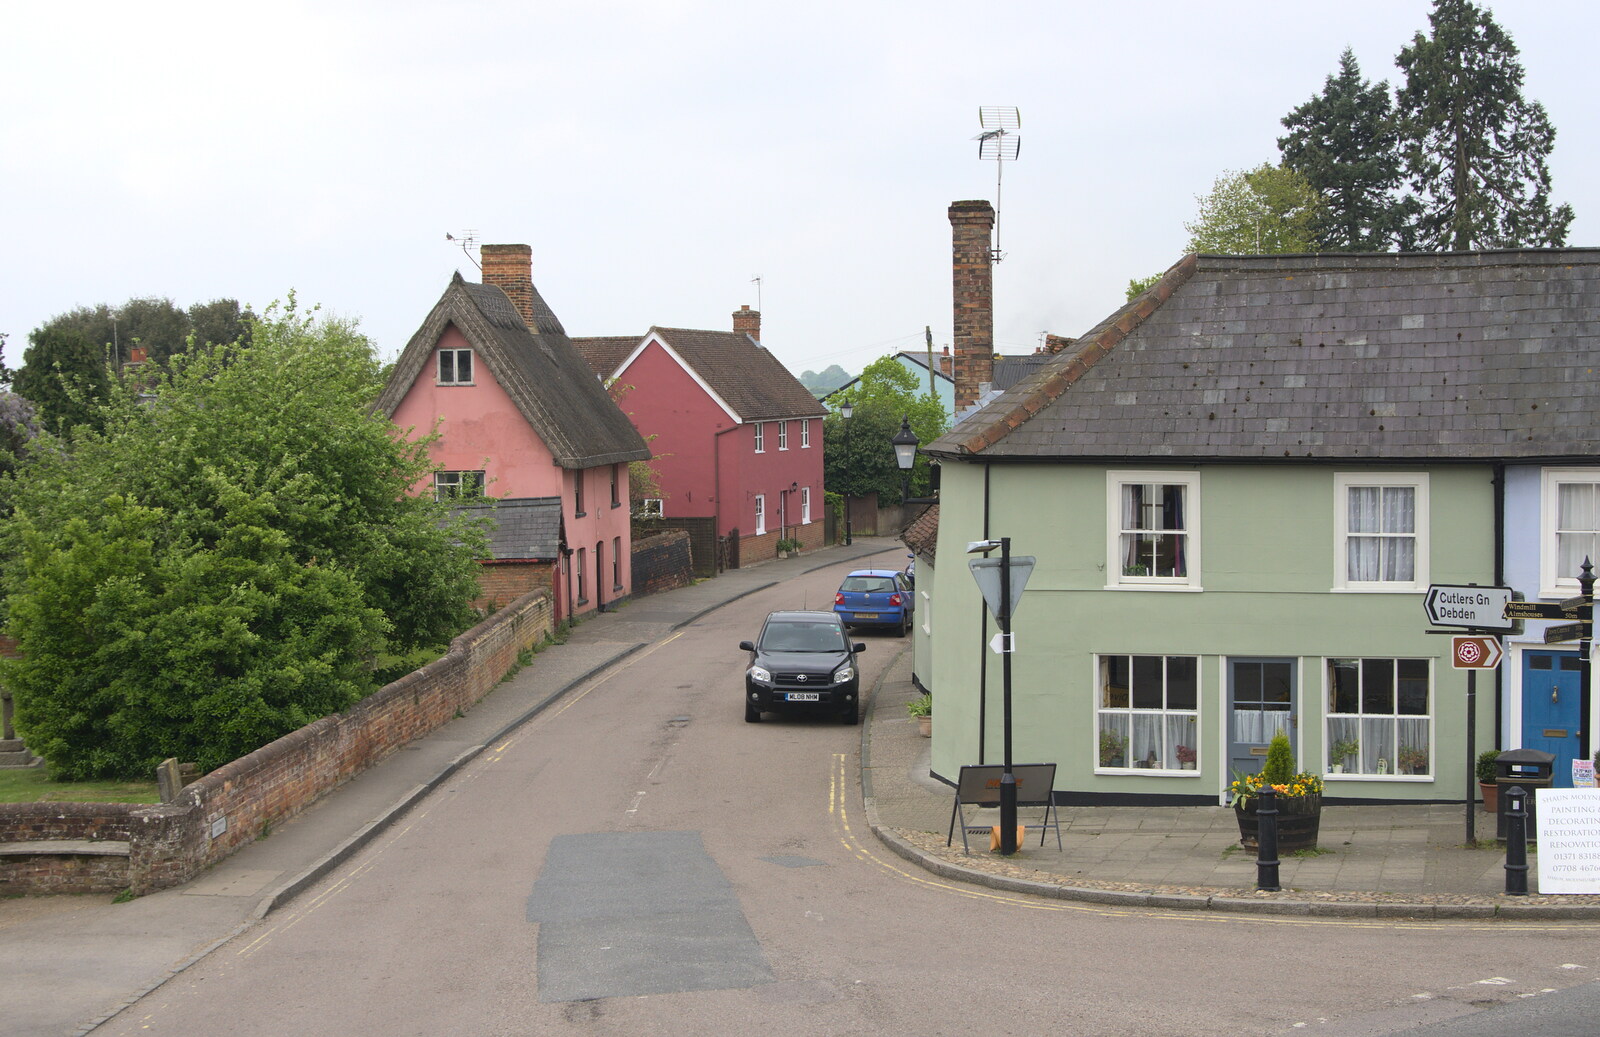 A view of Thaxted from The Last-Ever BSCC Weekend Away Bike Ride, Thaxted, Essex - 6th May 2017